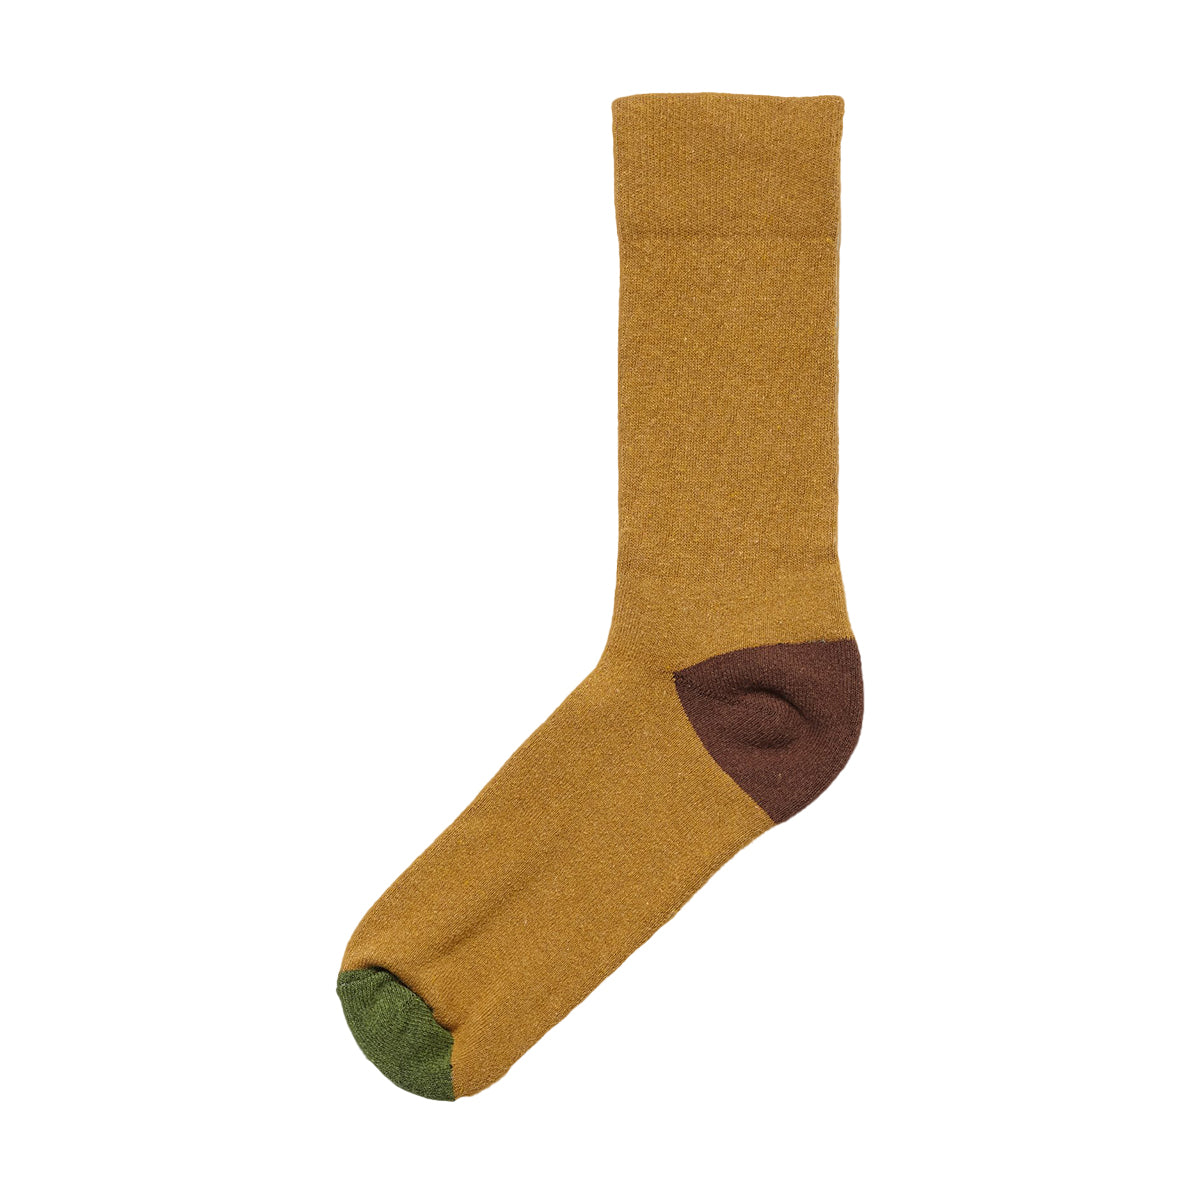 Paa - Paa - Crew Sox 2.5 - Golden Brown